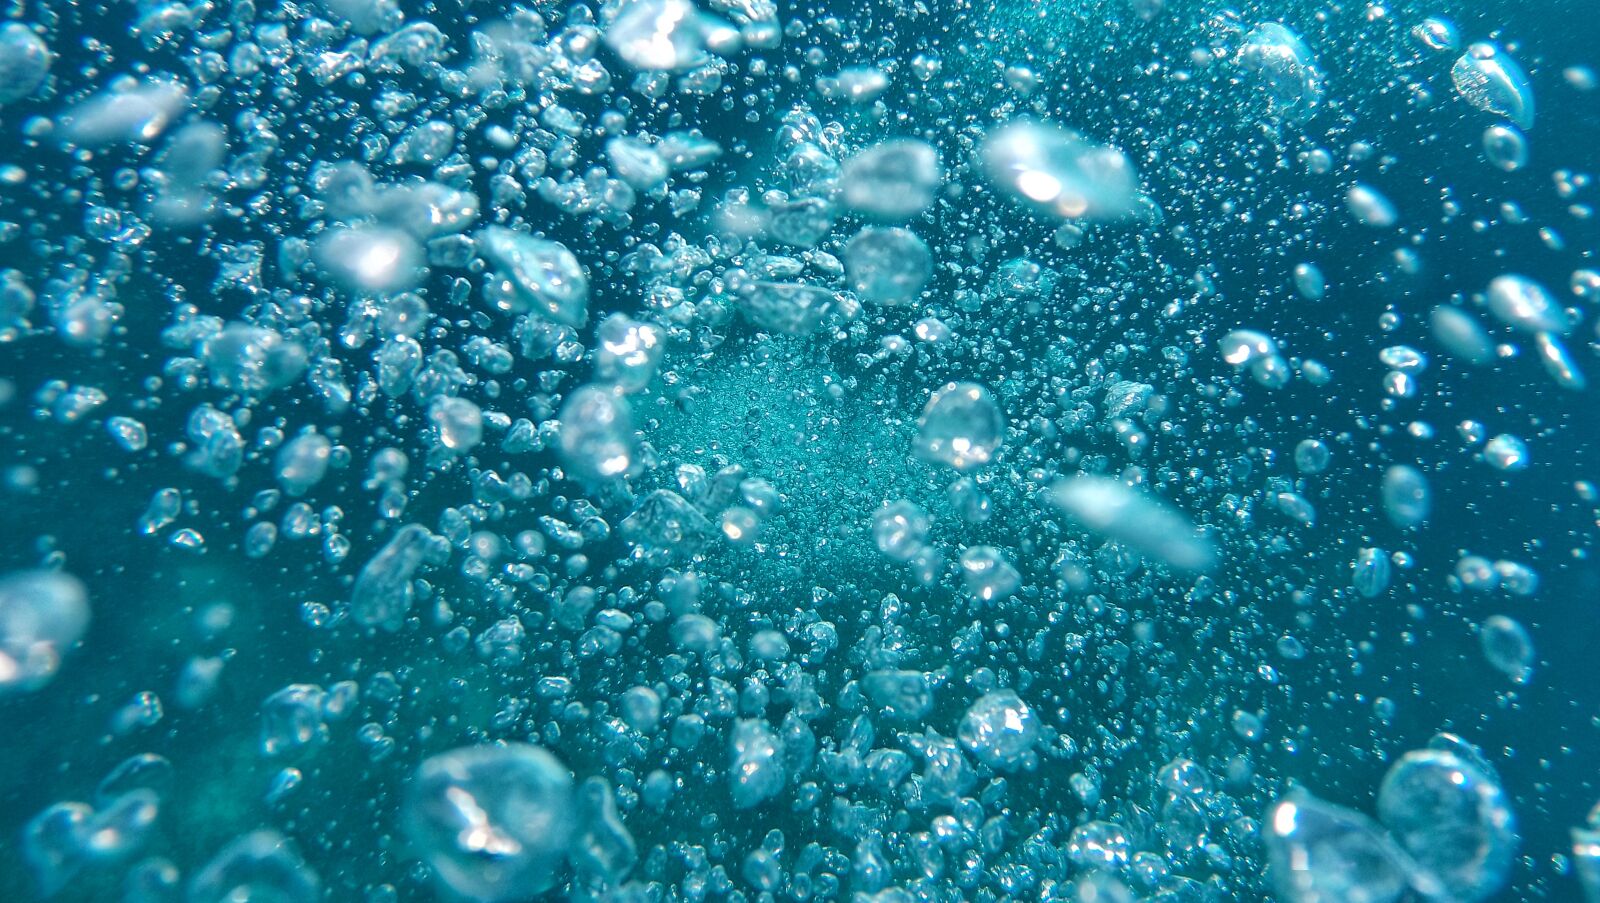 HTC RE sample photo. Air bubbles, sea, water photography